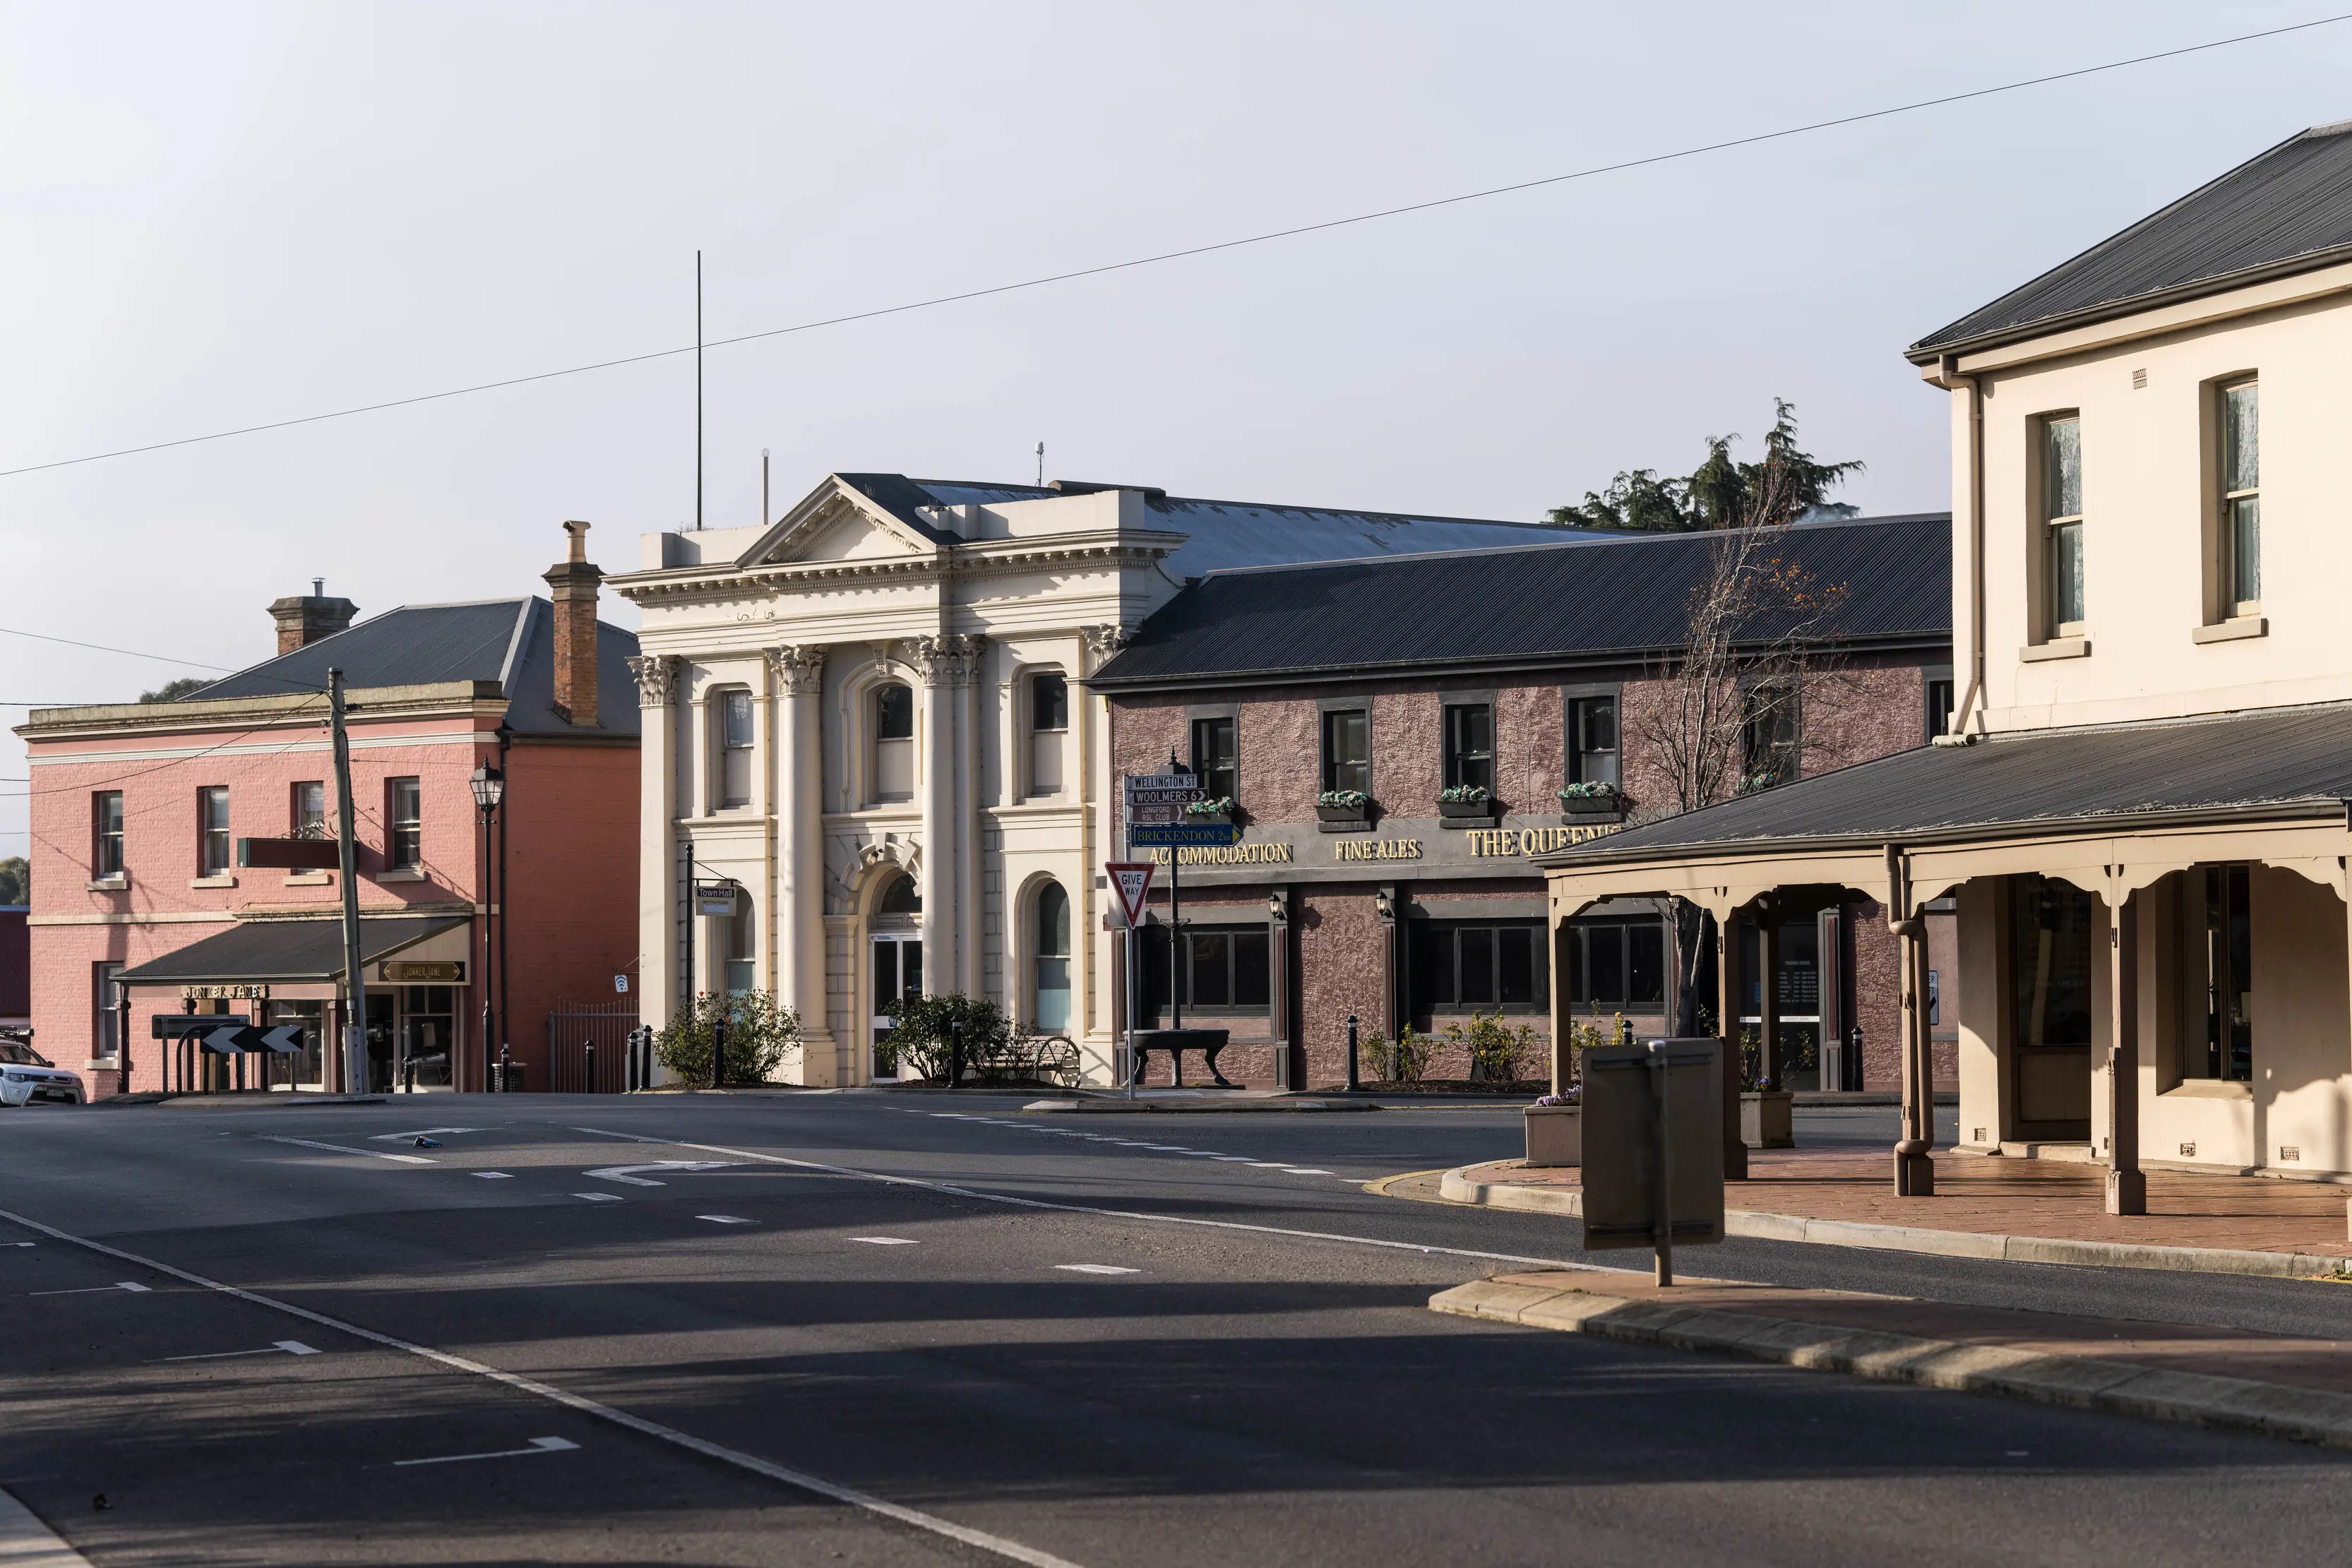 Streetscape of Wellington St, Longford, showing Longford Town Hall and The Queen's Arm Hotel.